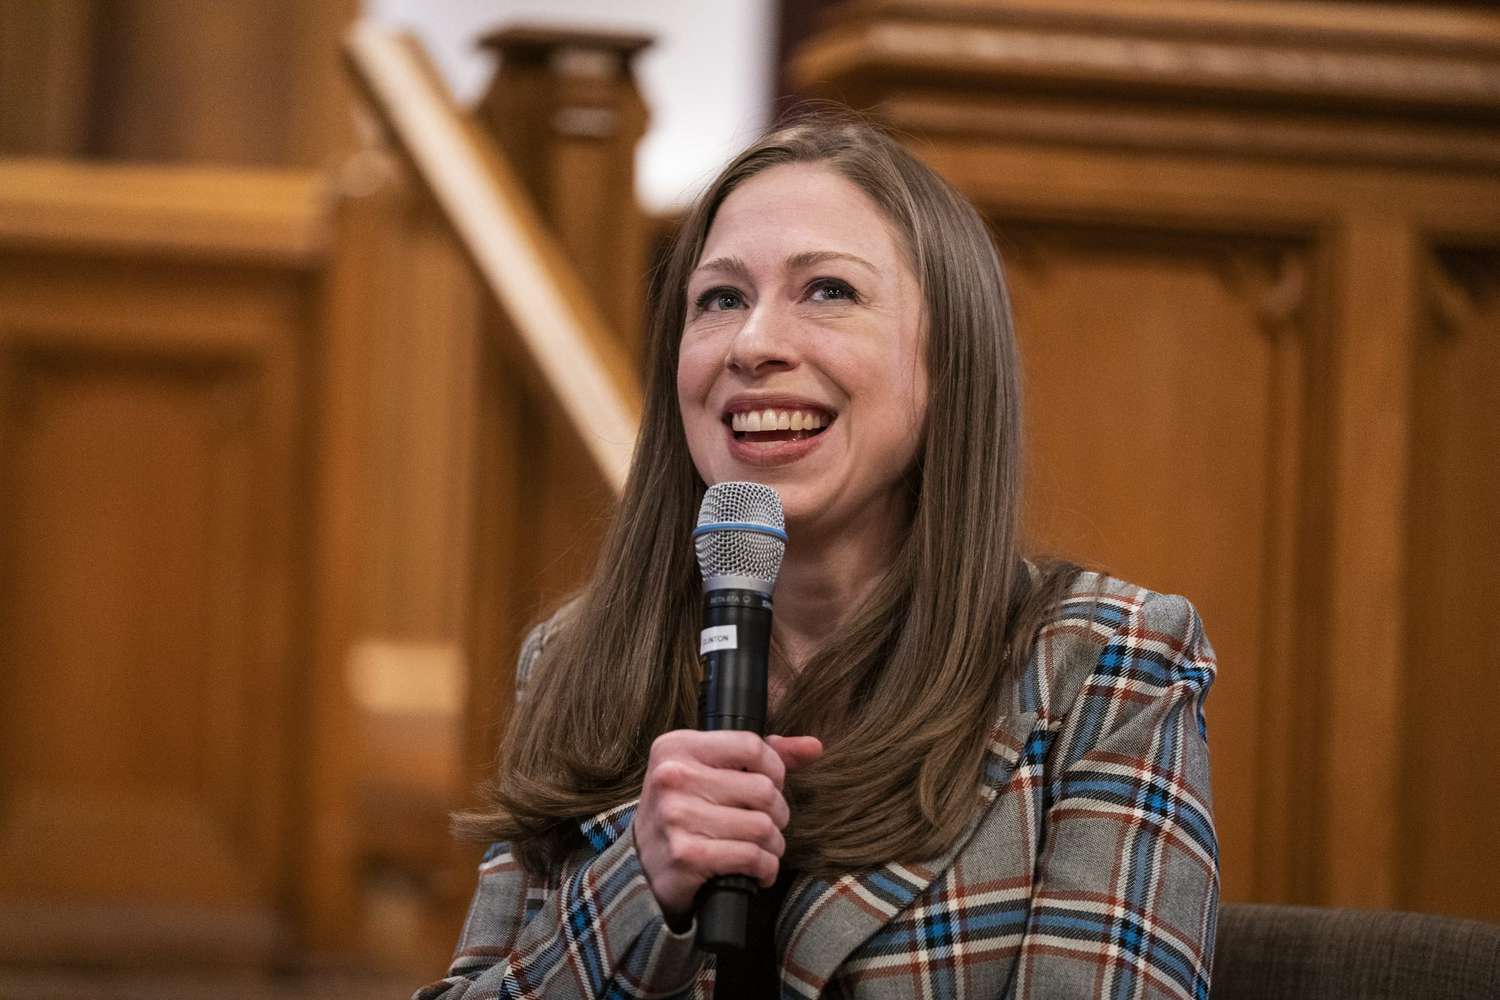 An image of Chelsea Clinton.